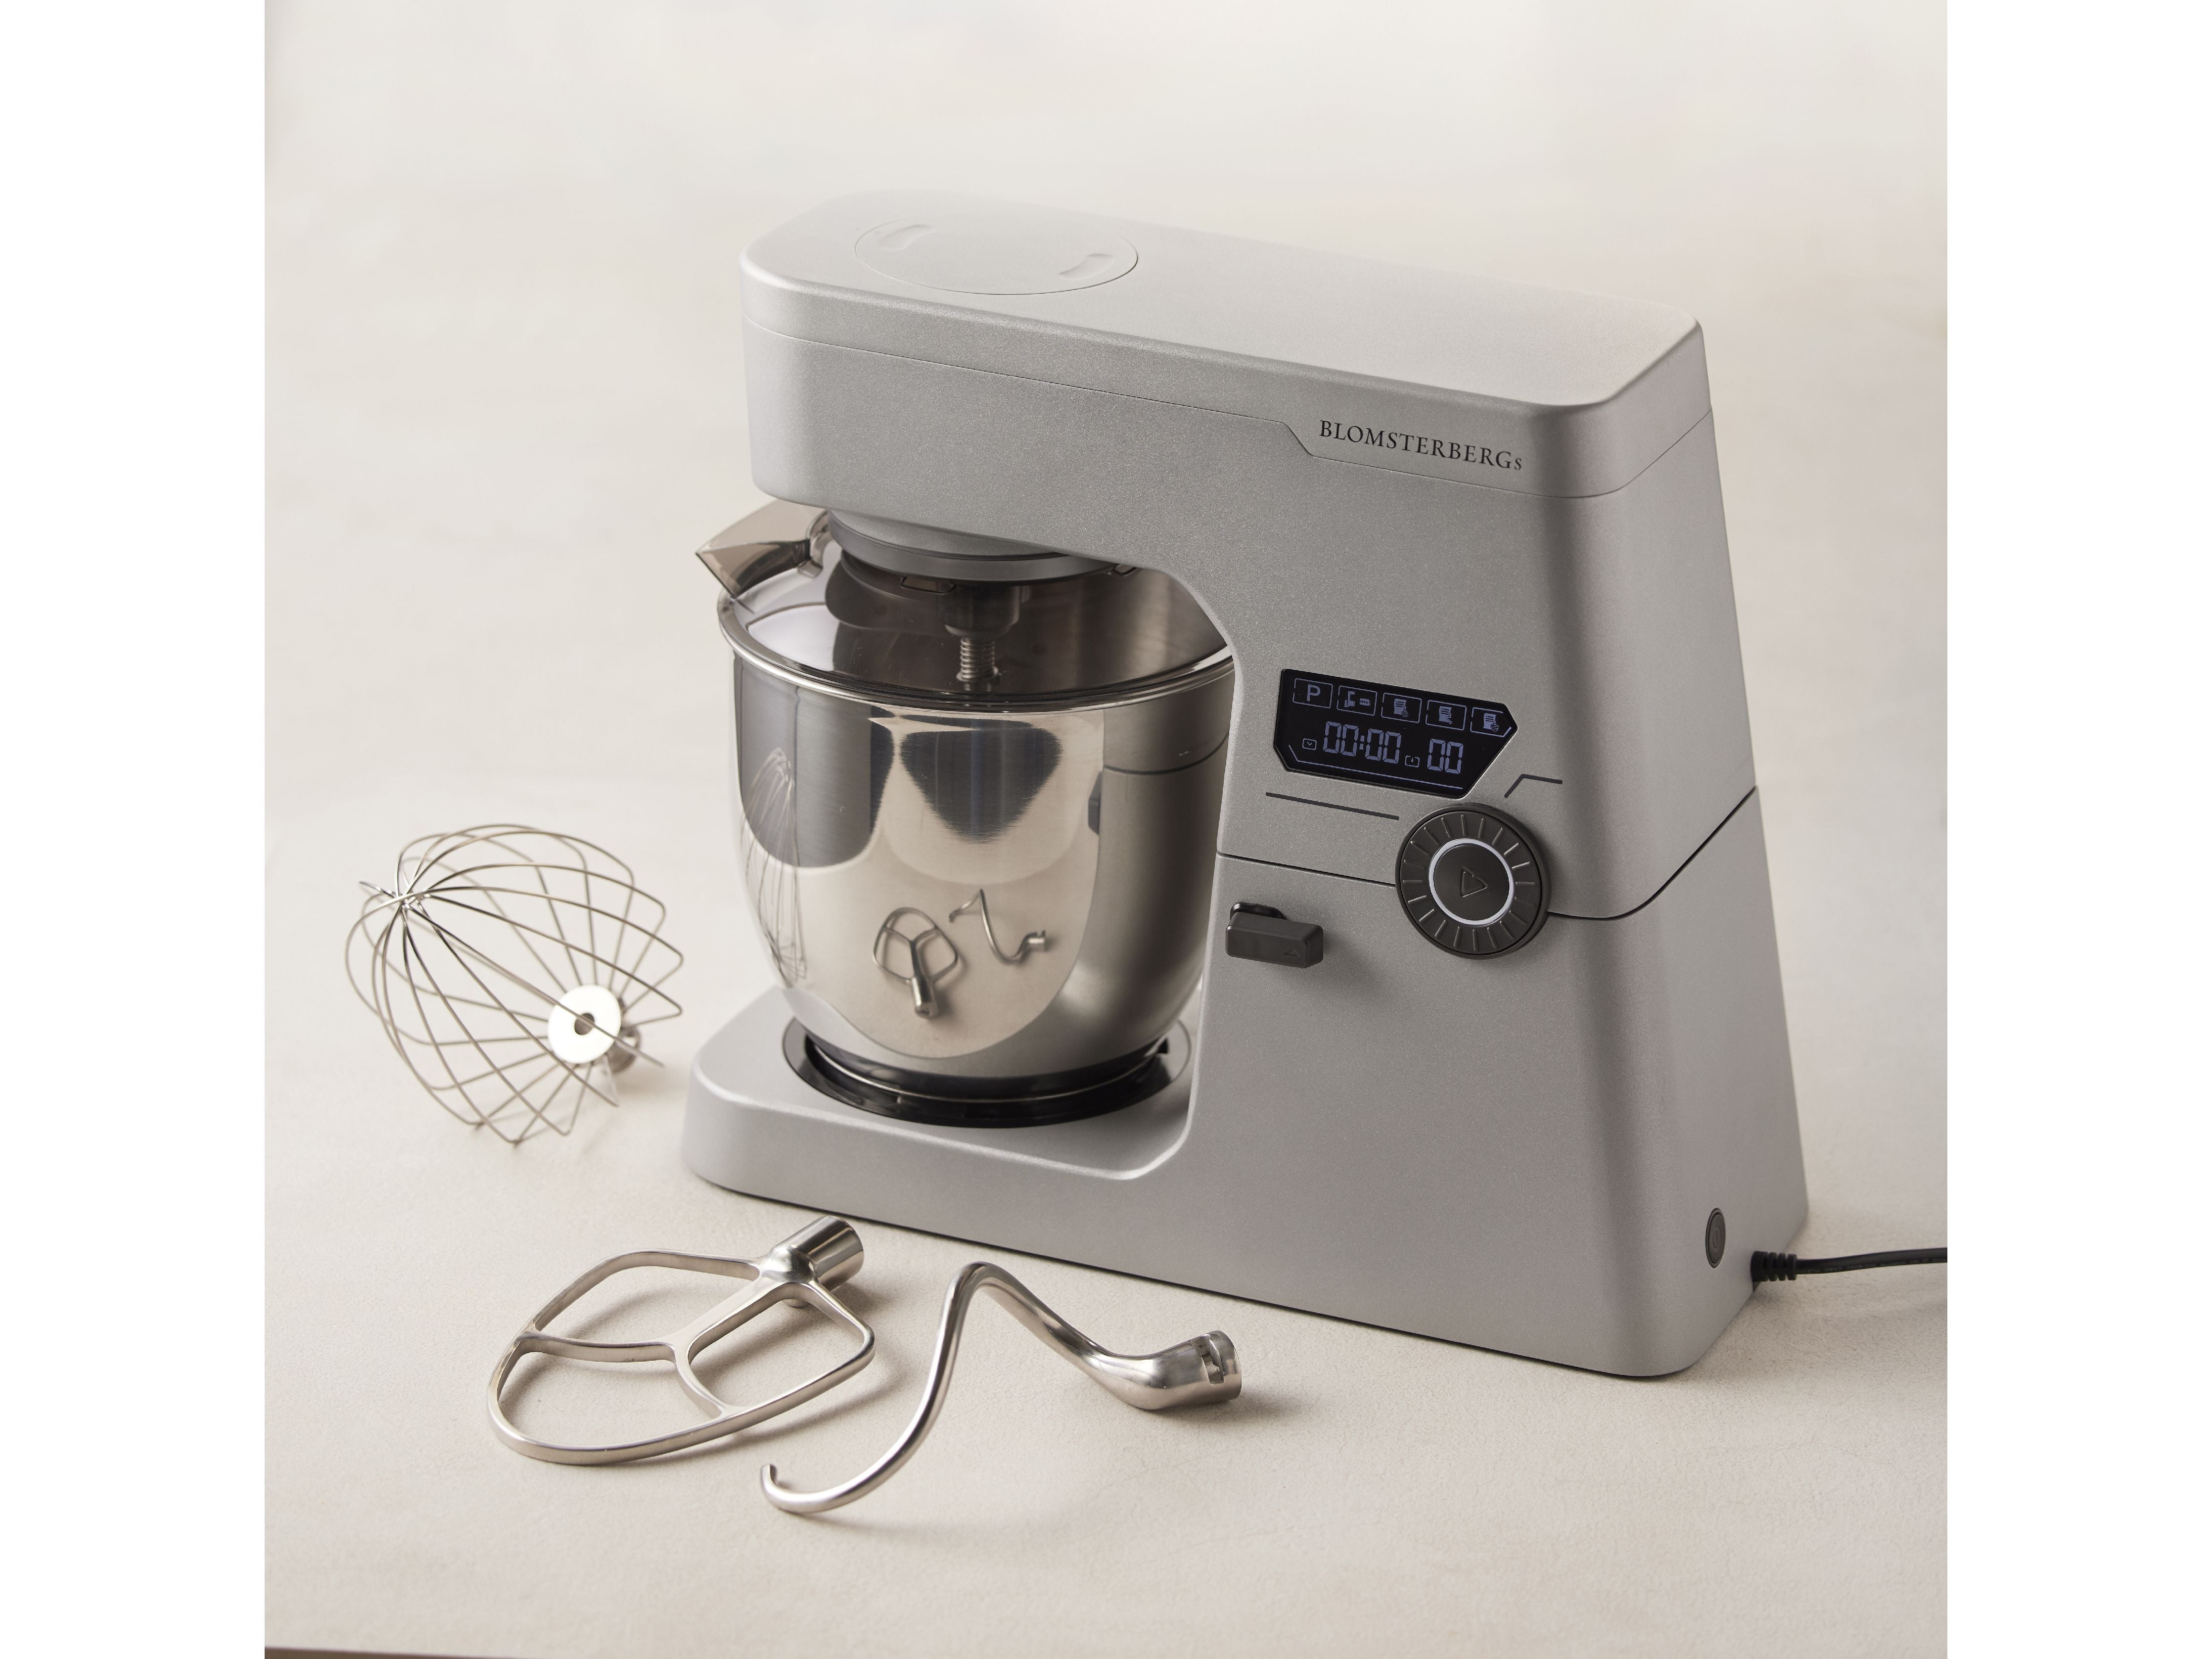 Blomsterbergs XL Stand Mixer 7升800瓦银